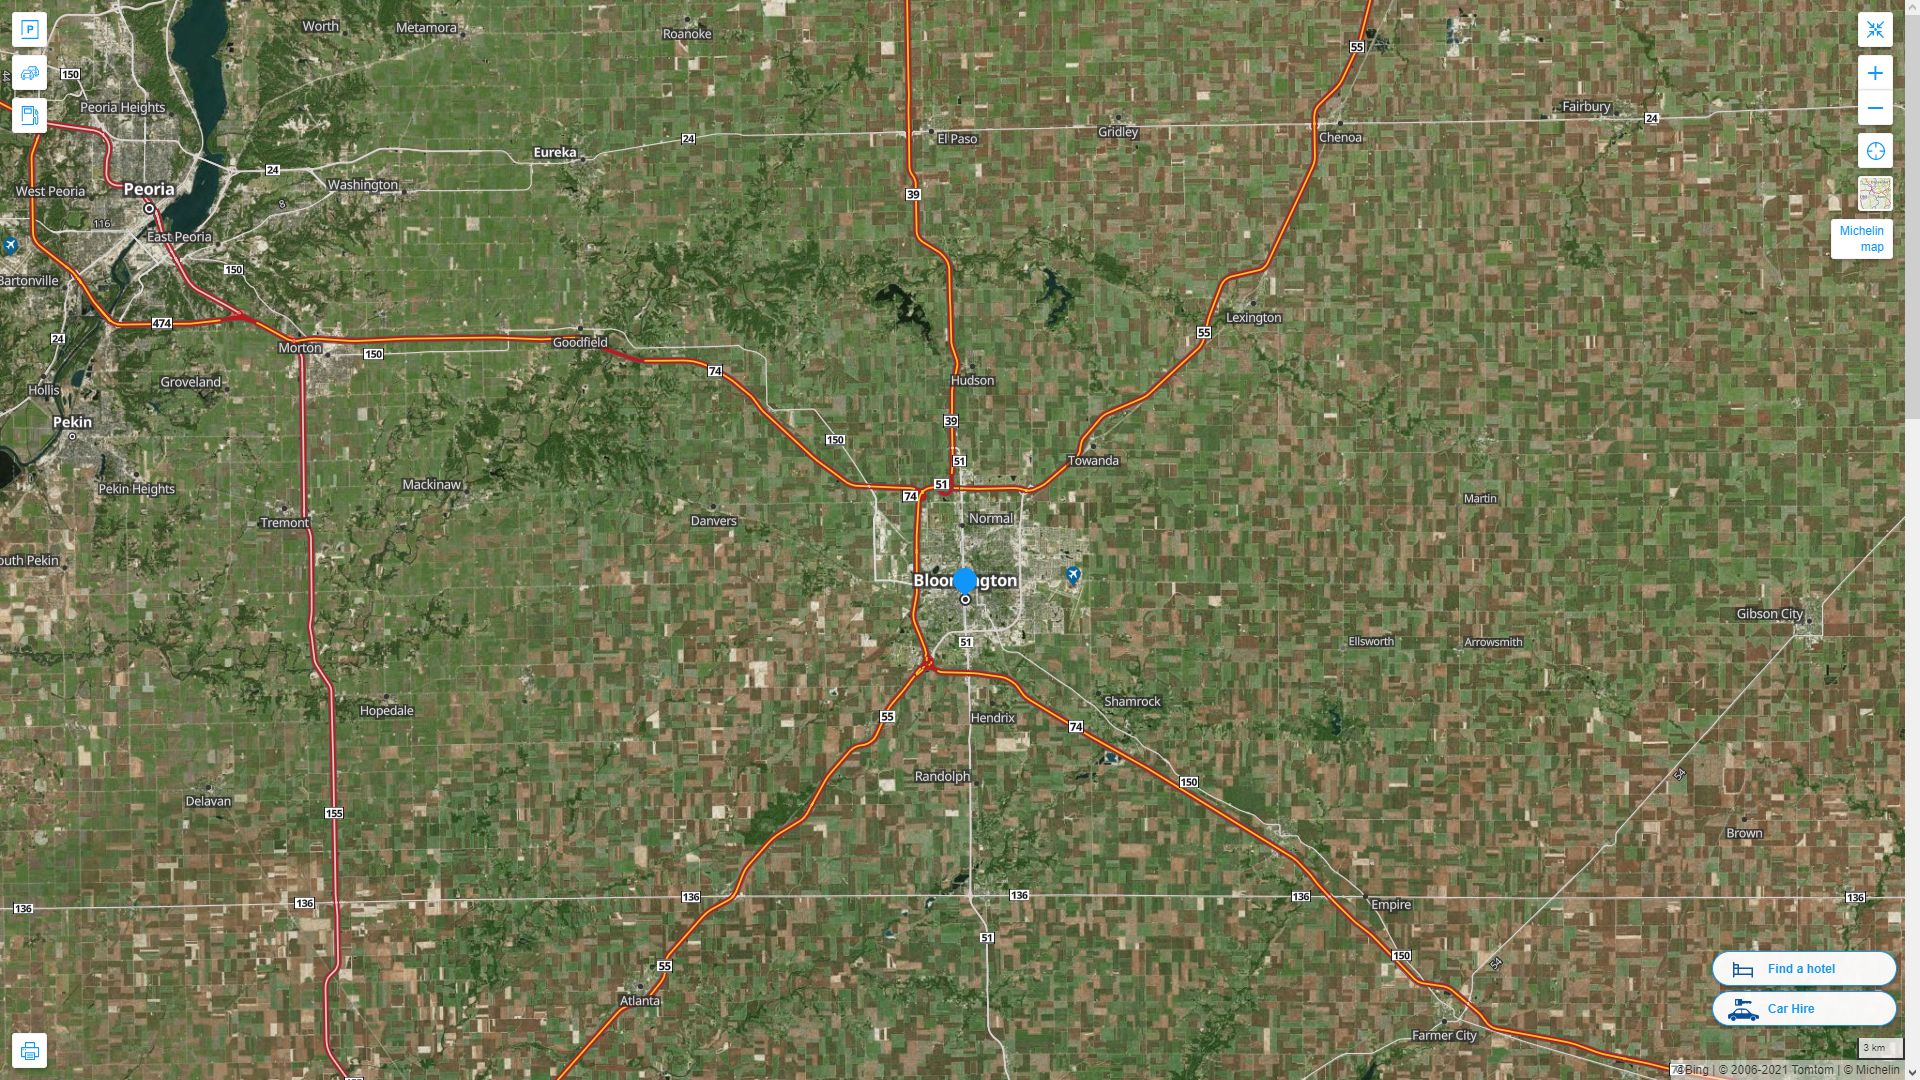 Bloomington illinois Highway and Road Map with Satellite View